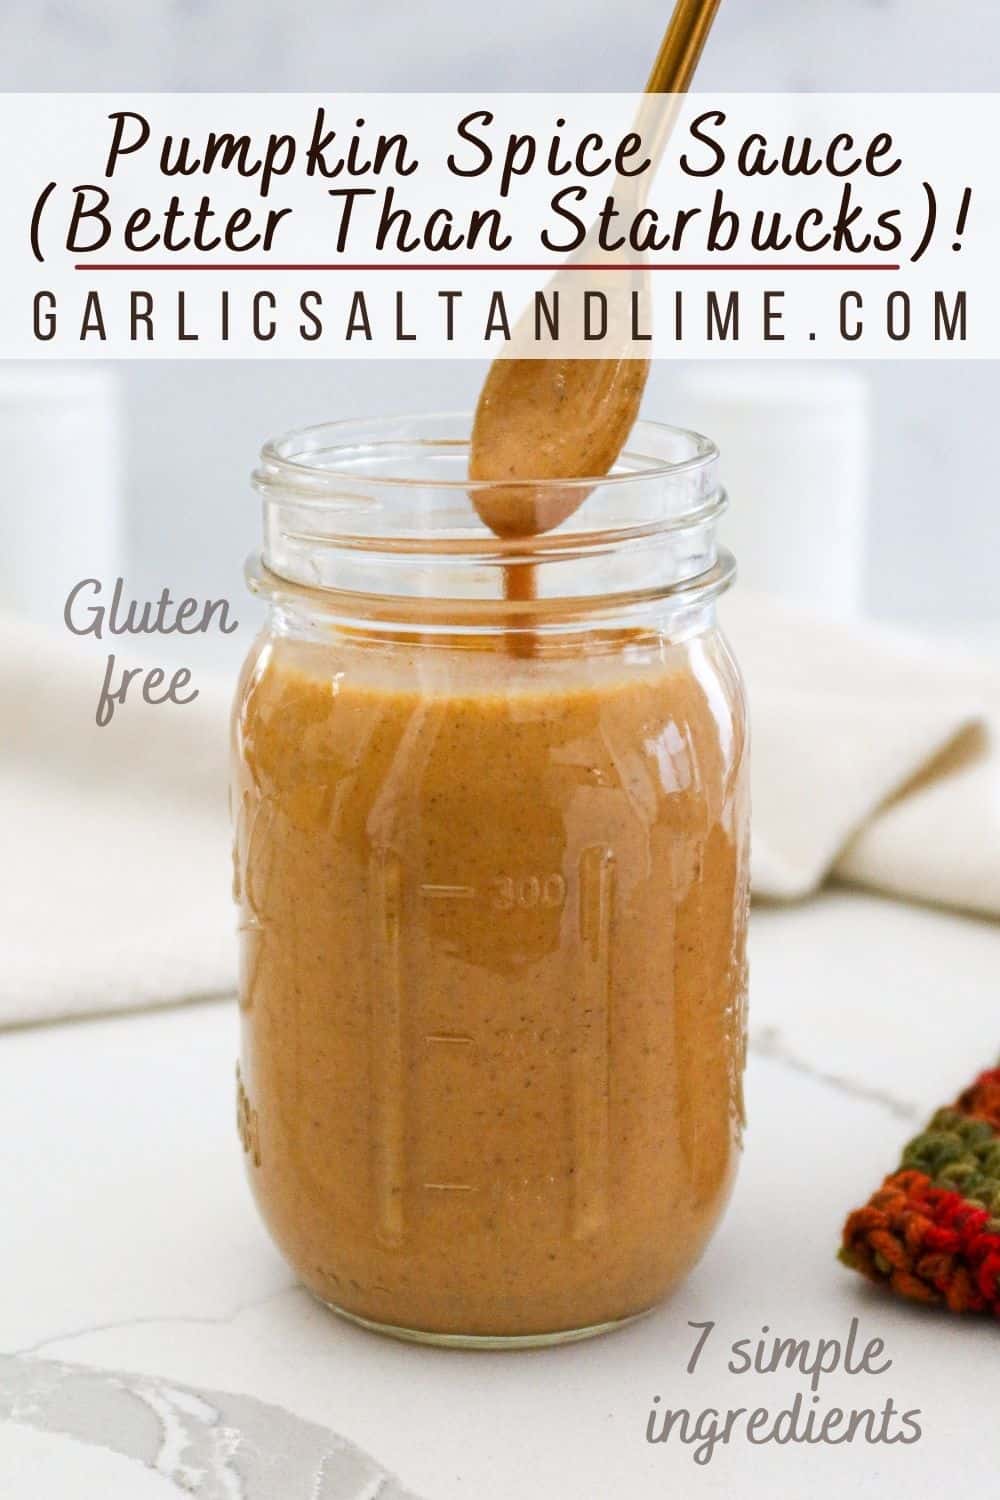 Pumpkin spice sauce in a mason jar with text overlay for Pinterest.